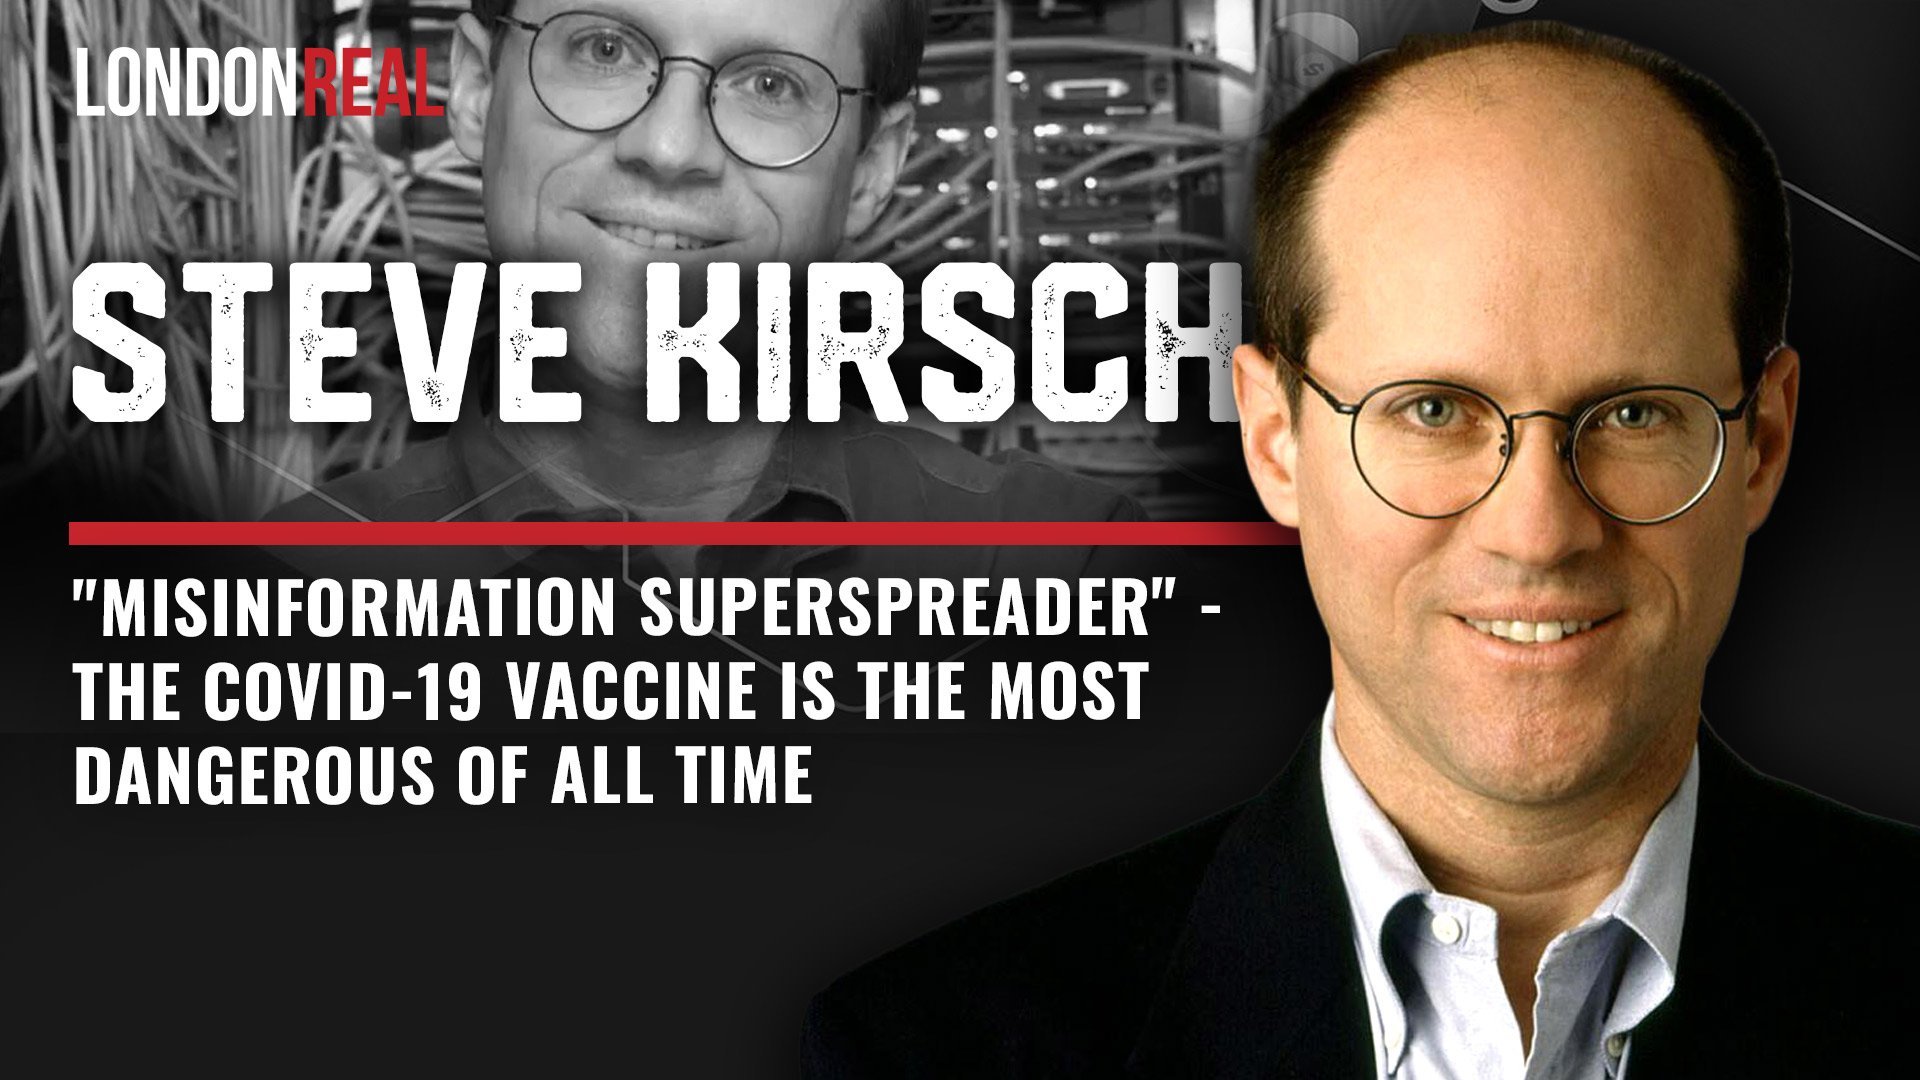 Steve Kirsch - "Misinformation Superspreader": The Covid-19 Vaccine Is The Most Dangerous Of All Time